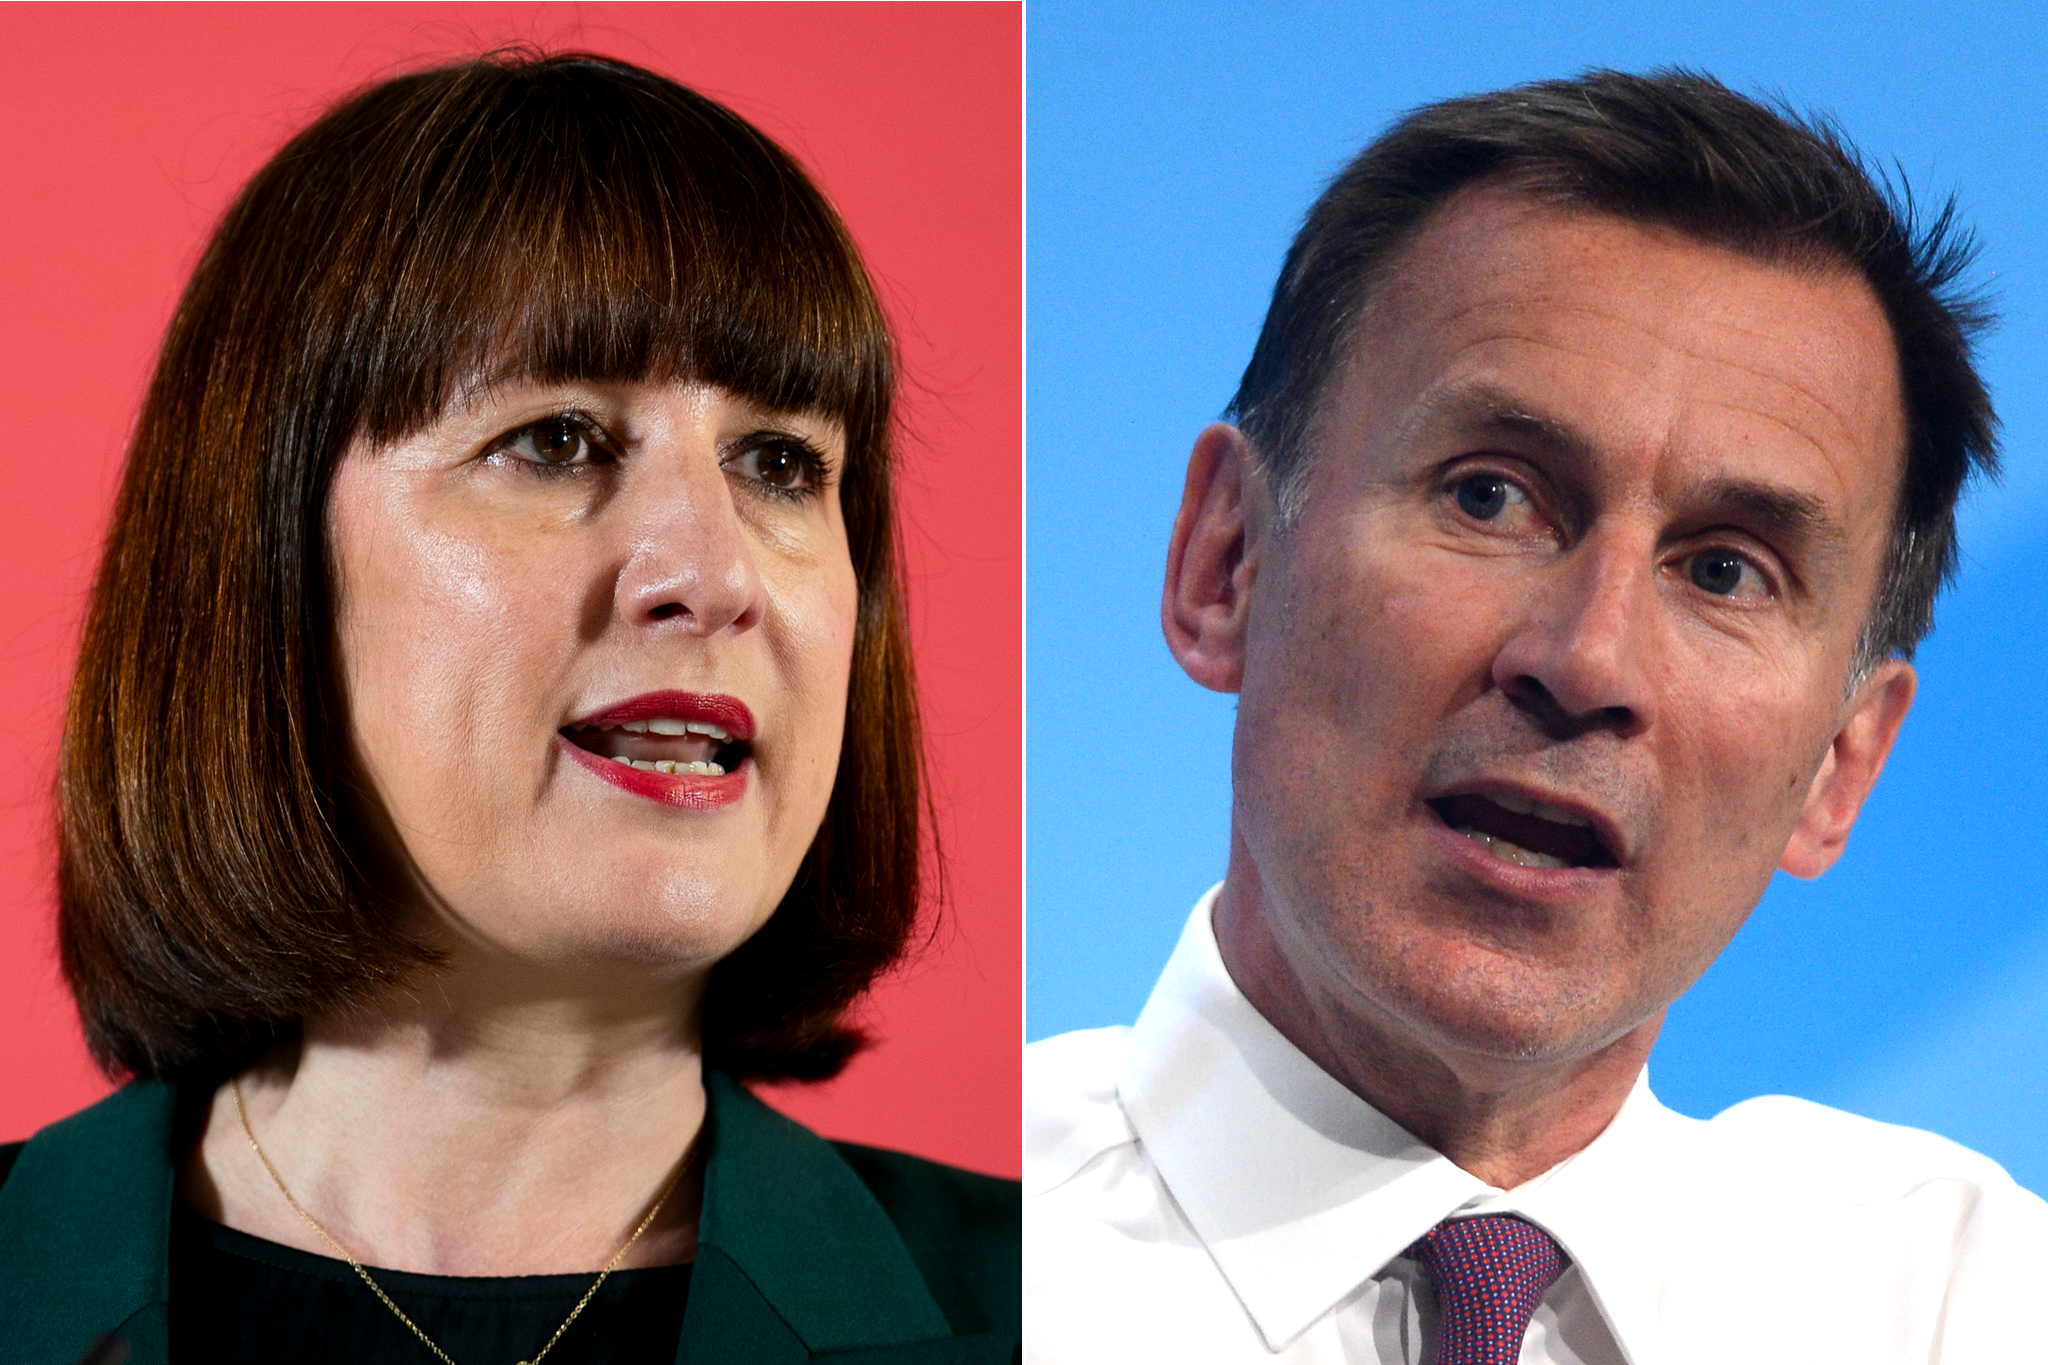 Jeremy Hunt and Rachel Reeves both set out their economic positions on Saturday’s front pages